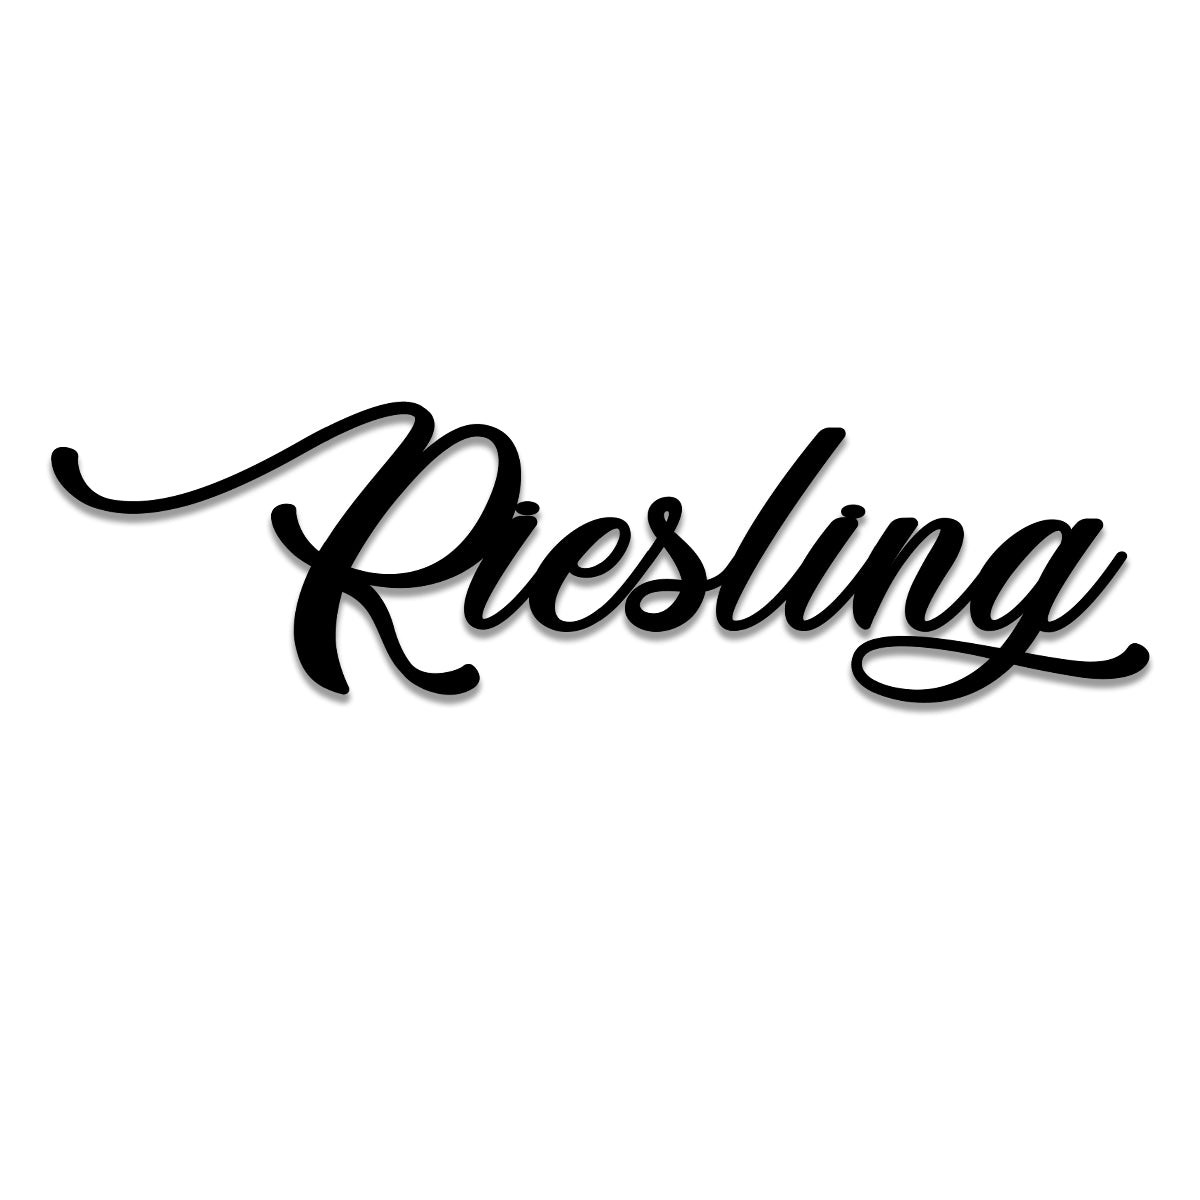 Riesling Wine Metal Bar Sign, Pub, Tap, Wall Decor, Wedding Art Gift For Him/her, Metal Laser Cut Metal Signs Custom Gift Ideas 14x14IN